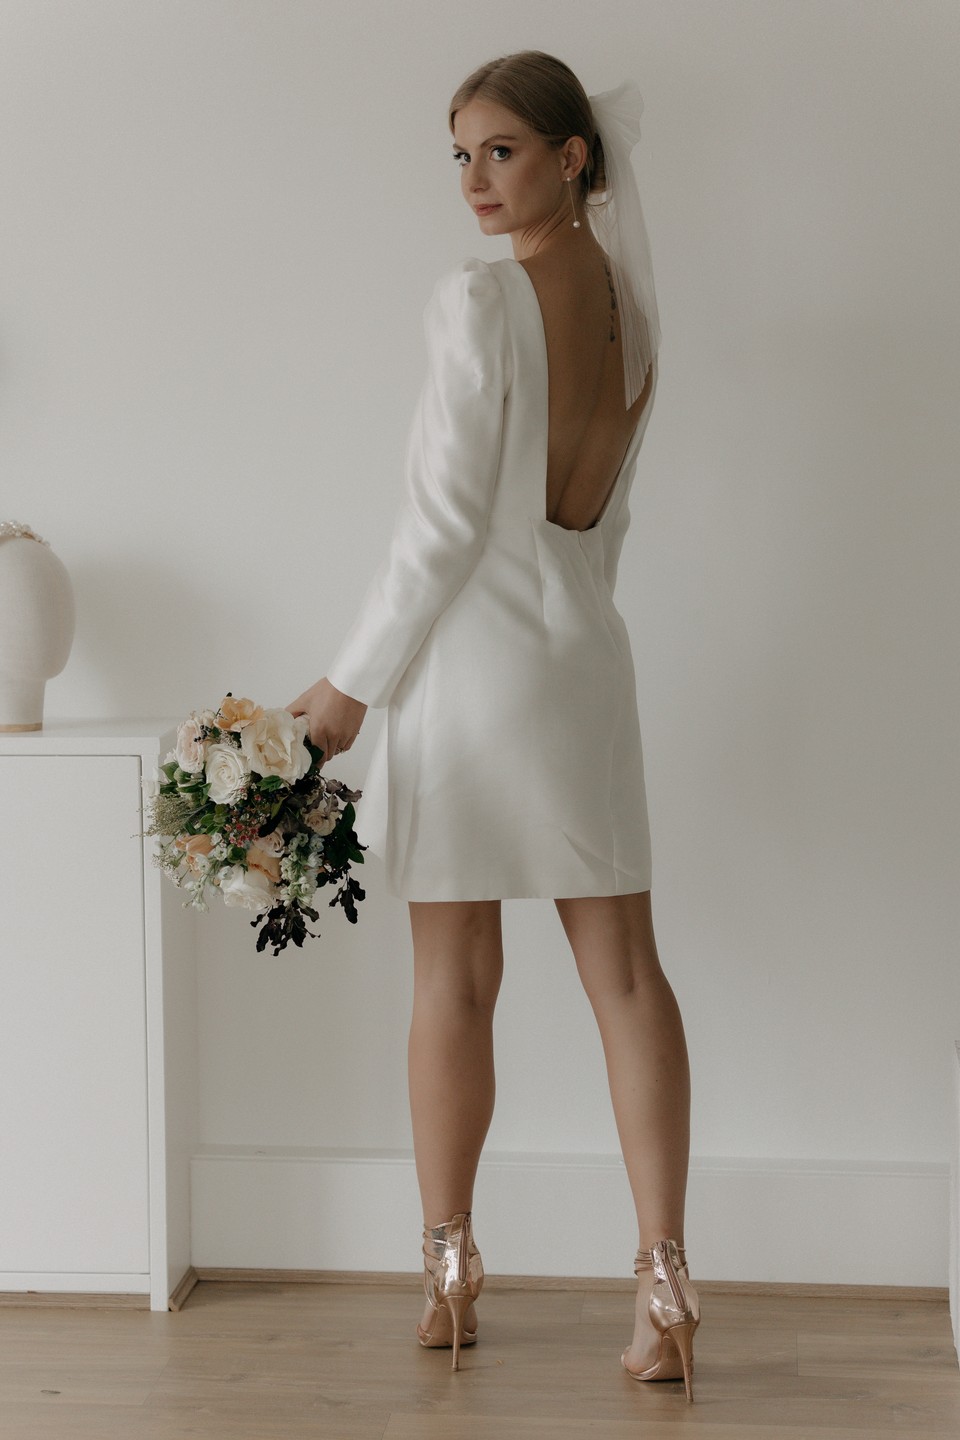 Introducing our brand new collection of minis, tailored for the modern bride | Feathers & Florence | Wedding Dress Preston